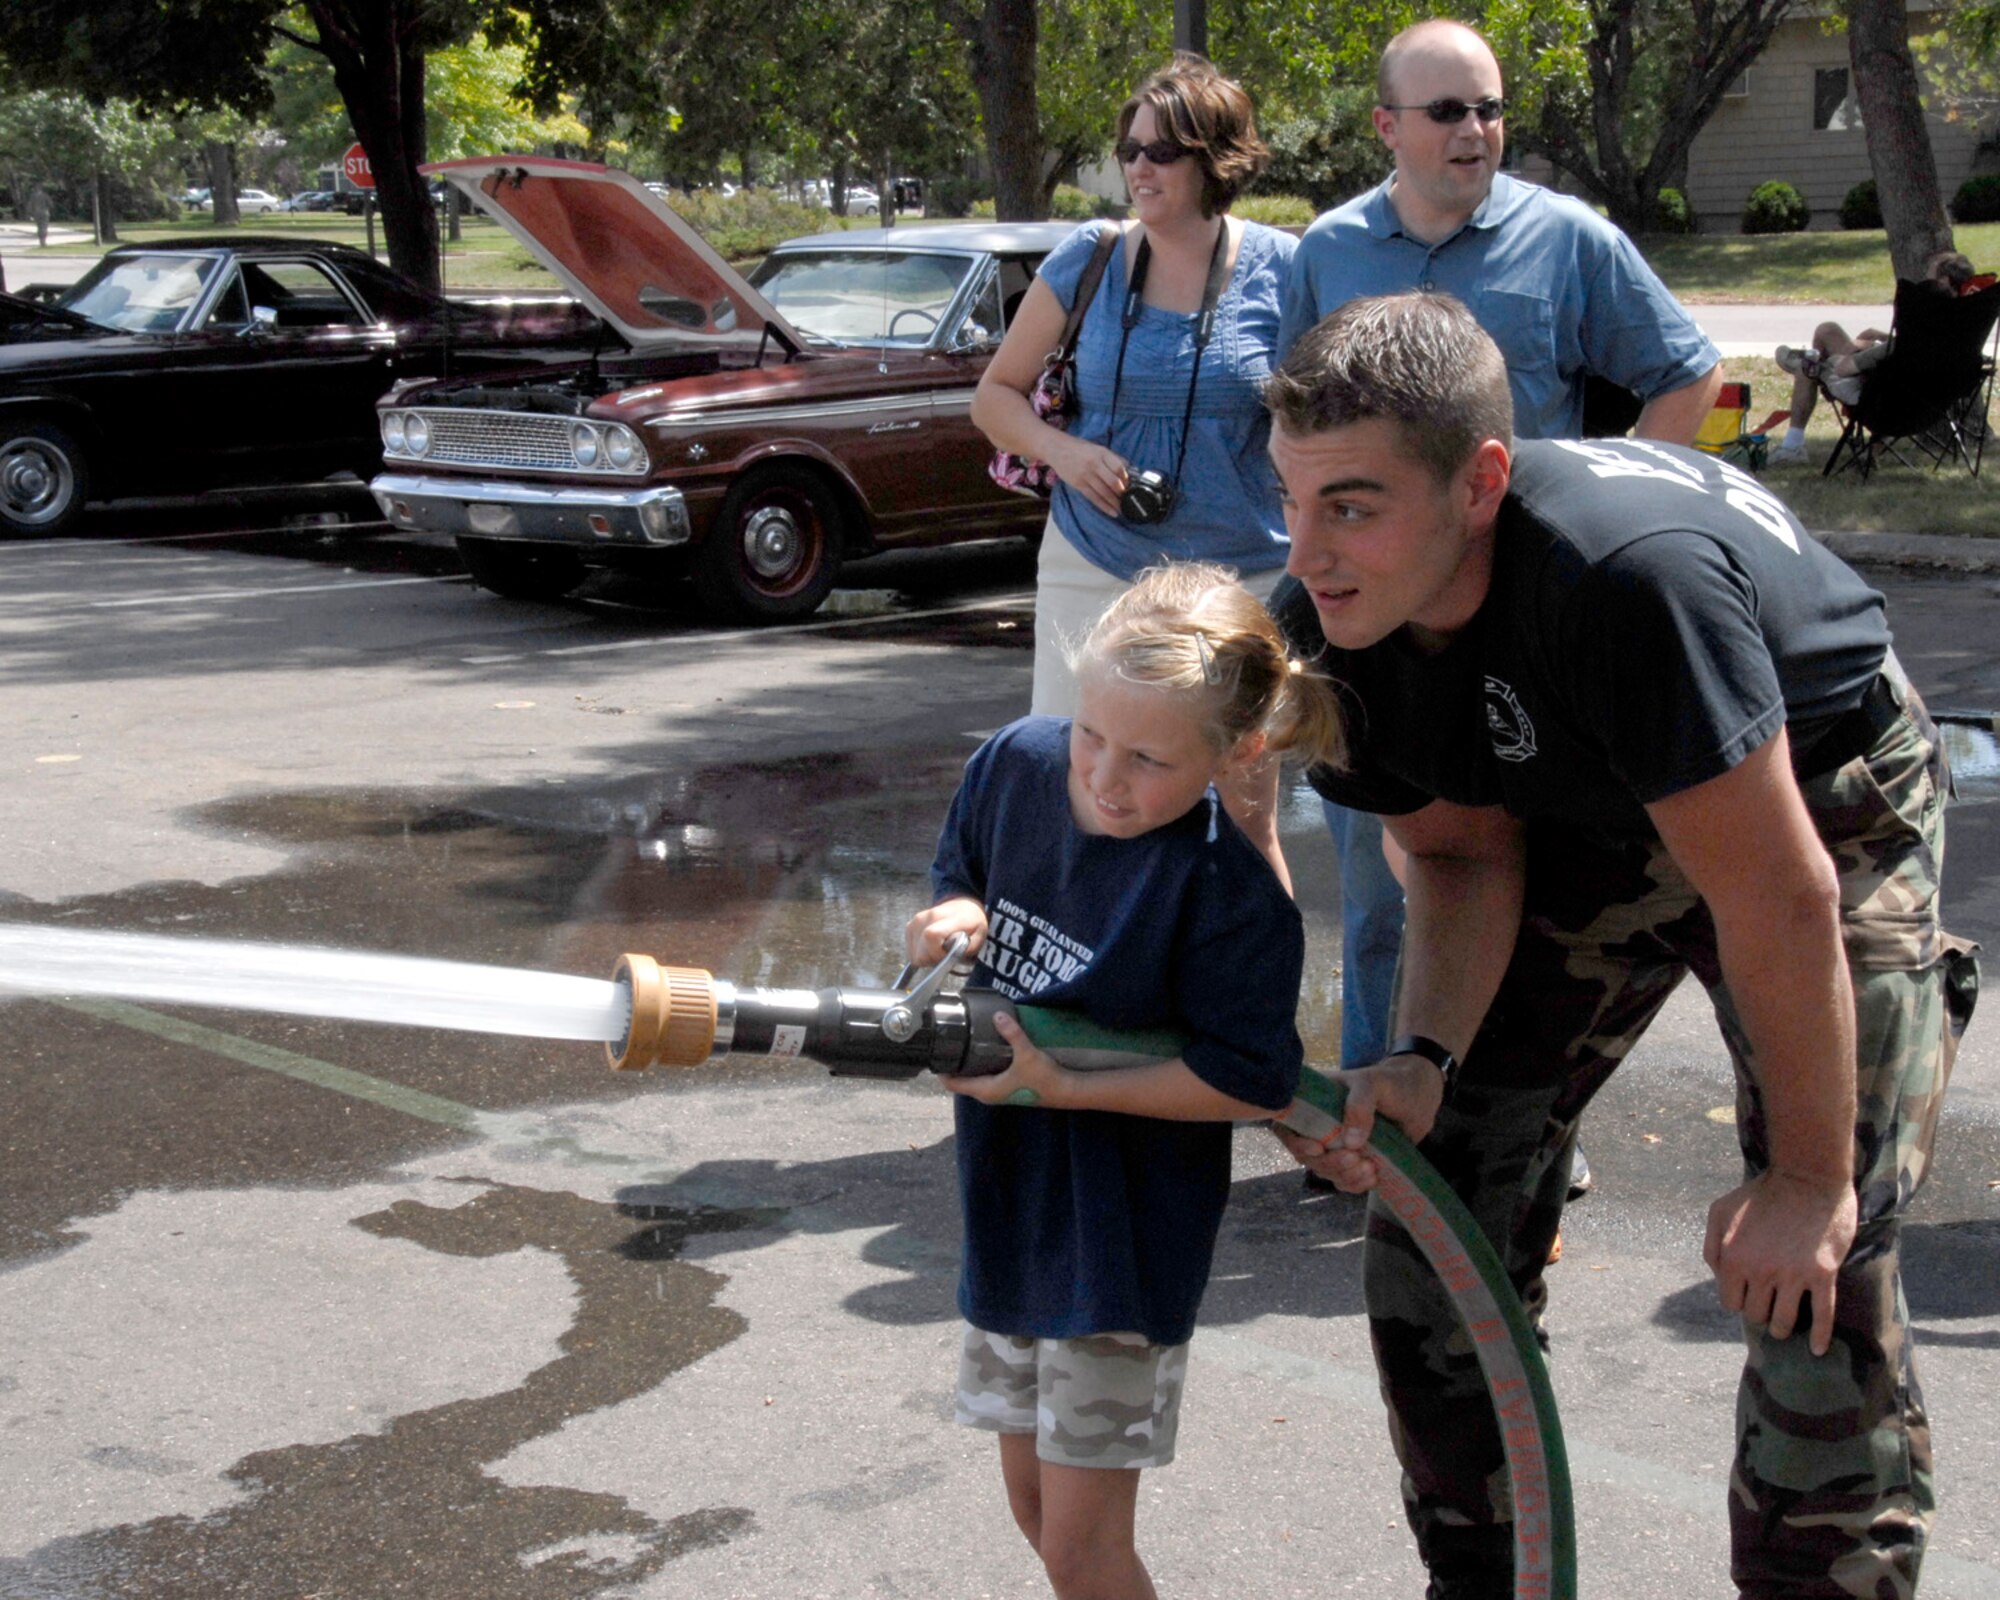 The 133rd Airlift Wing, St. Paul, Minn., held its annual Family Day on Aug. 16, 2008. Activities included a rock climbing wall, a K-9 demonstration from the Hennepin County Sherriff's office, games and pony rides.